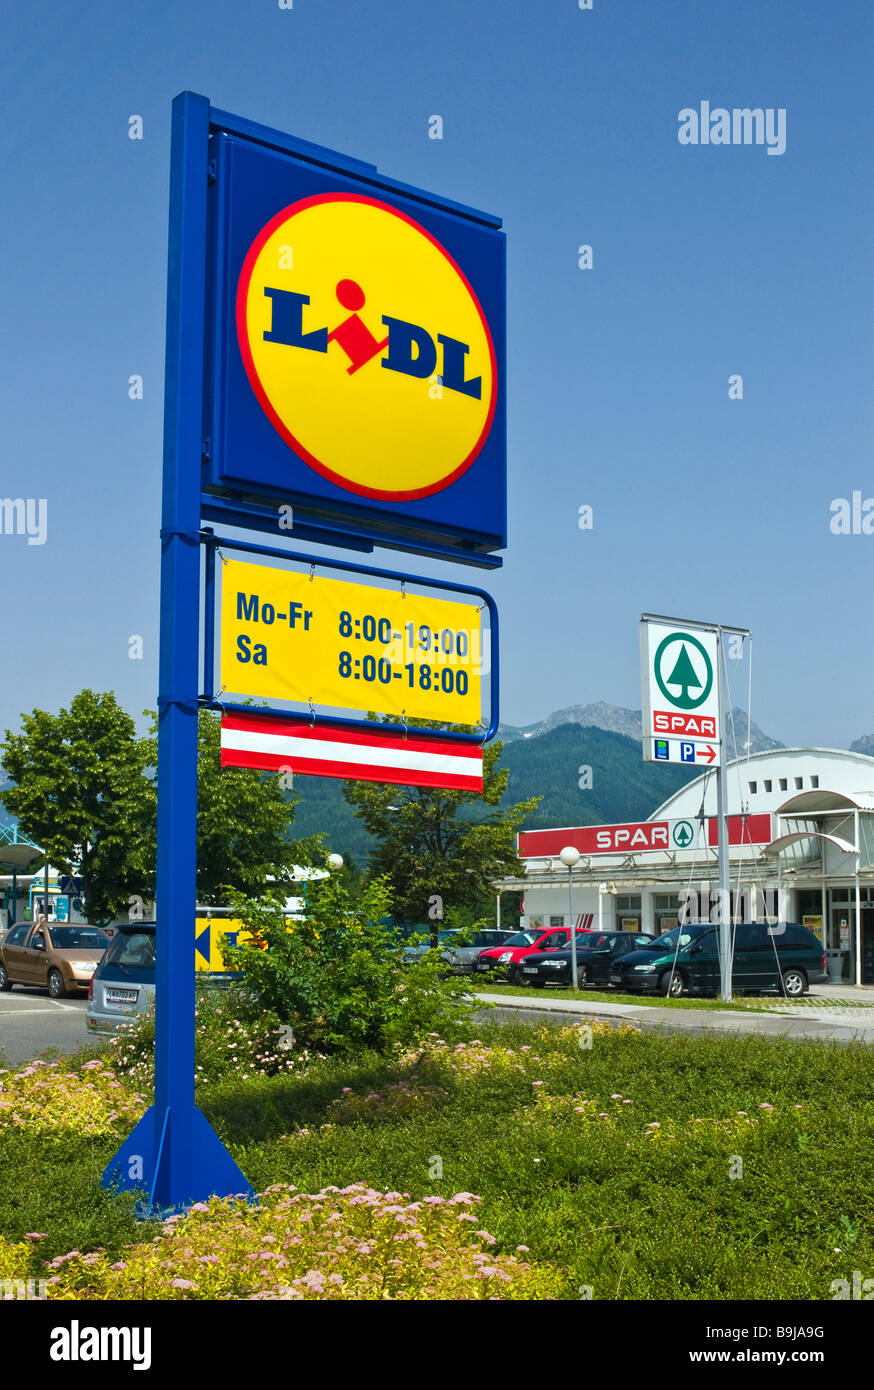 Signposts of Lidl and Spar supermarket chains, Austria, Europe Stock Photo  - Alamy